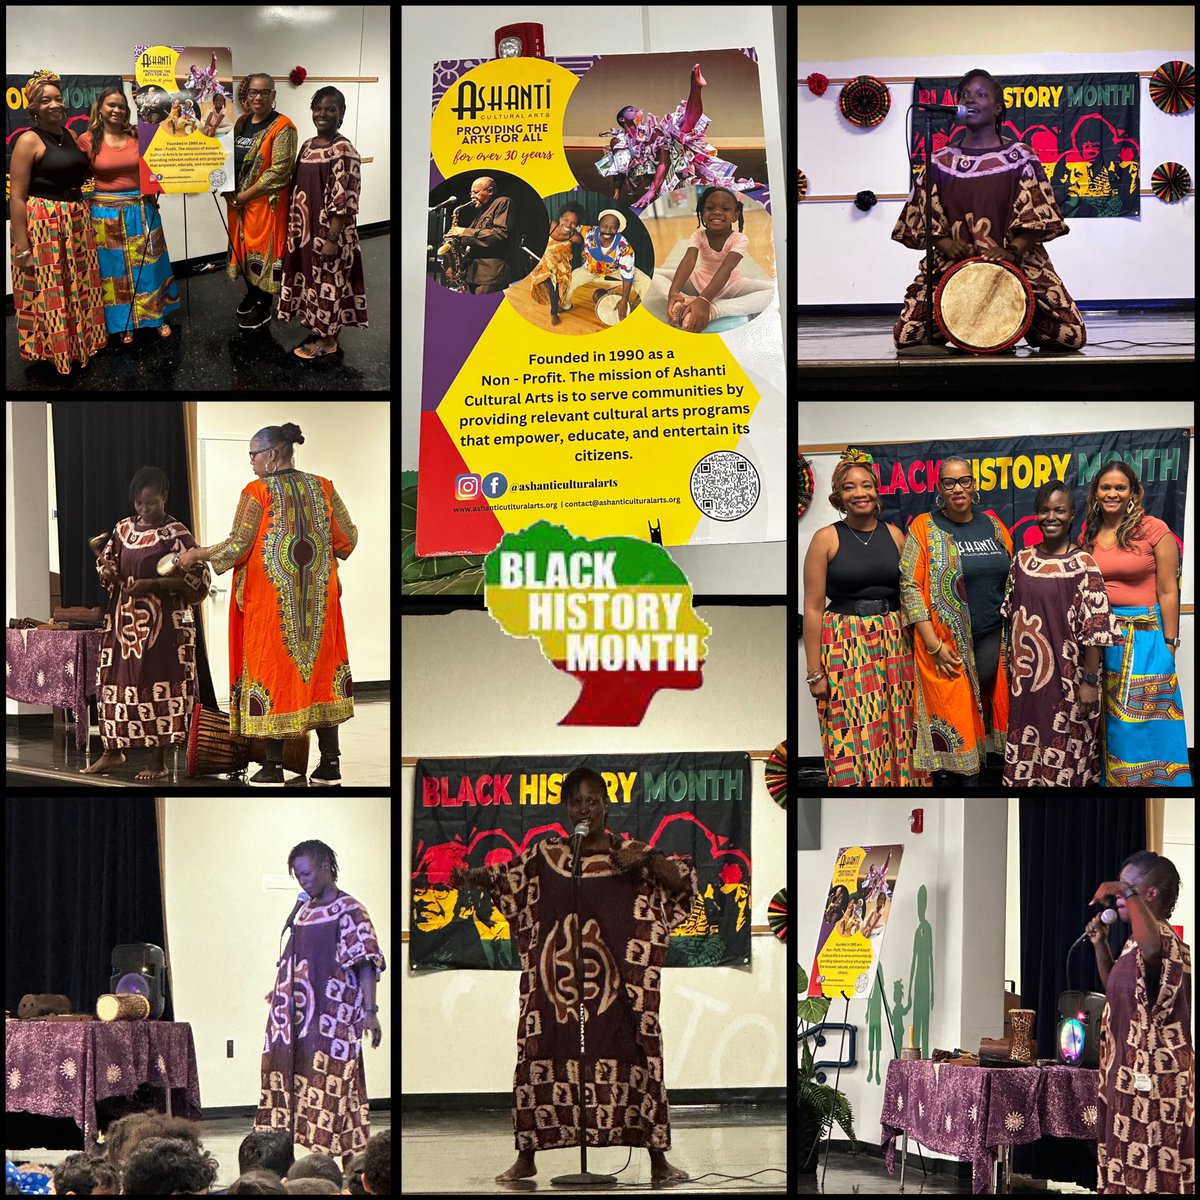 Thank you to @AshantiCultural for coming out to engage our students in African storytelling, drumming, and dance for Black History Month! @BCPSNorthRegion @mypompanobeach @CypressOwls @Alphagirl97